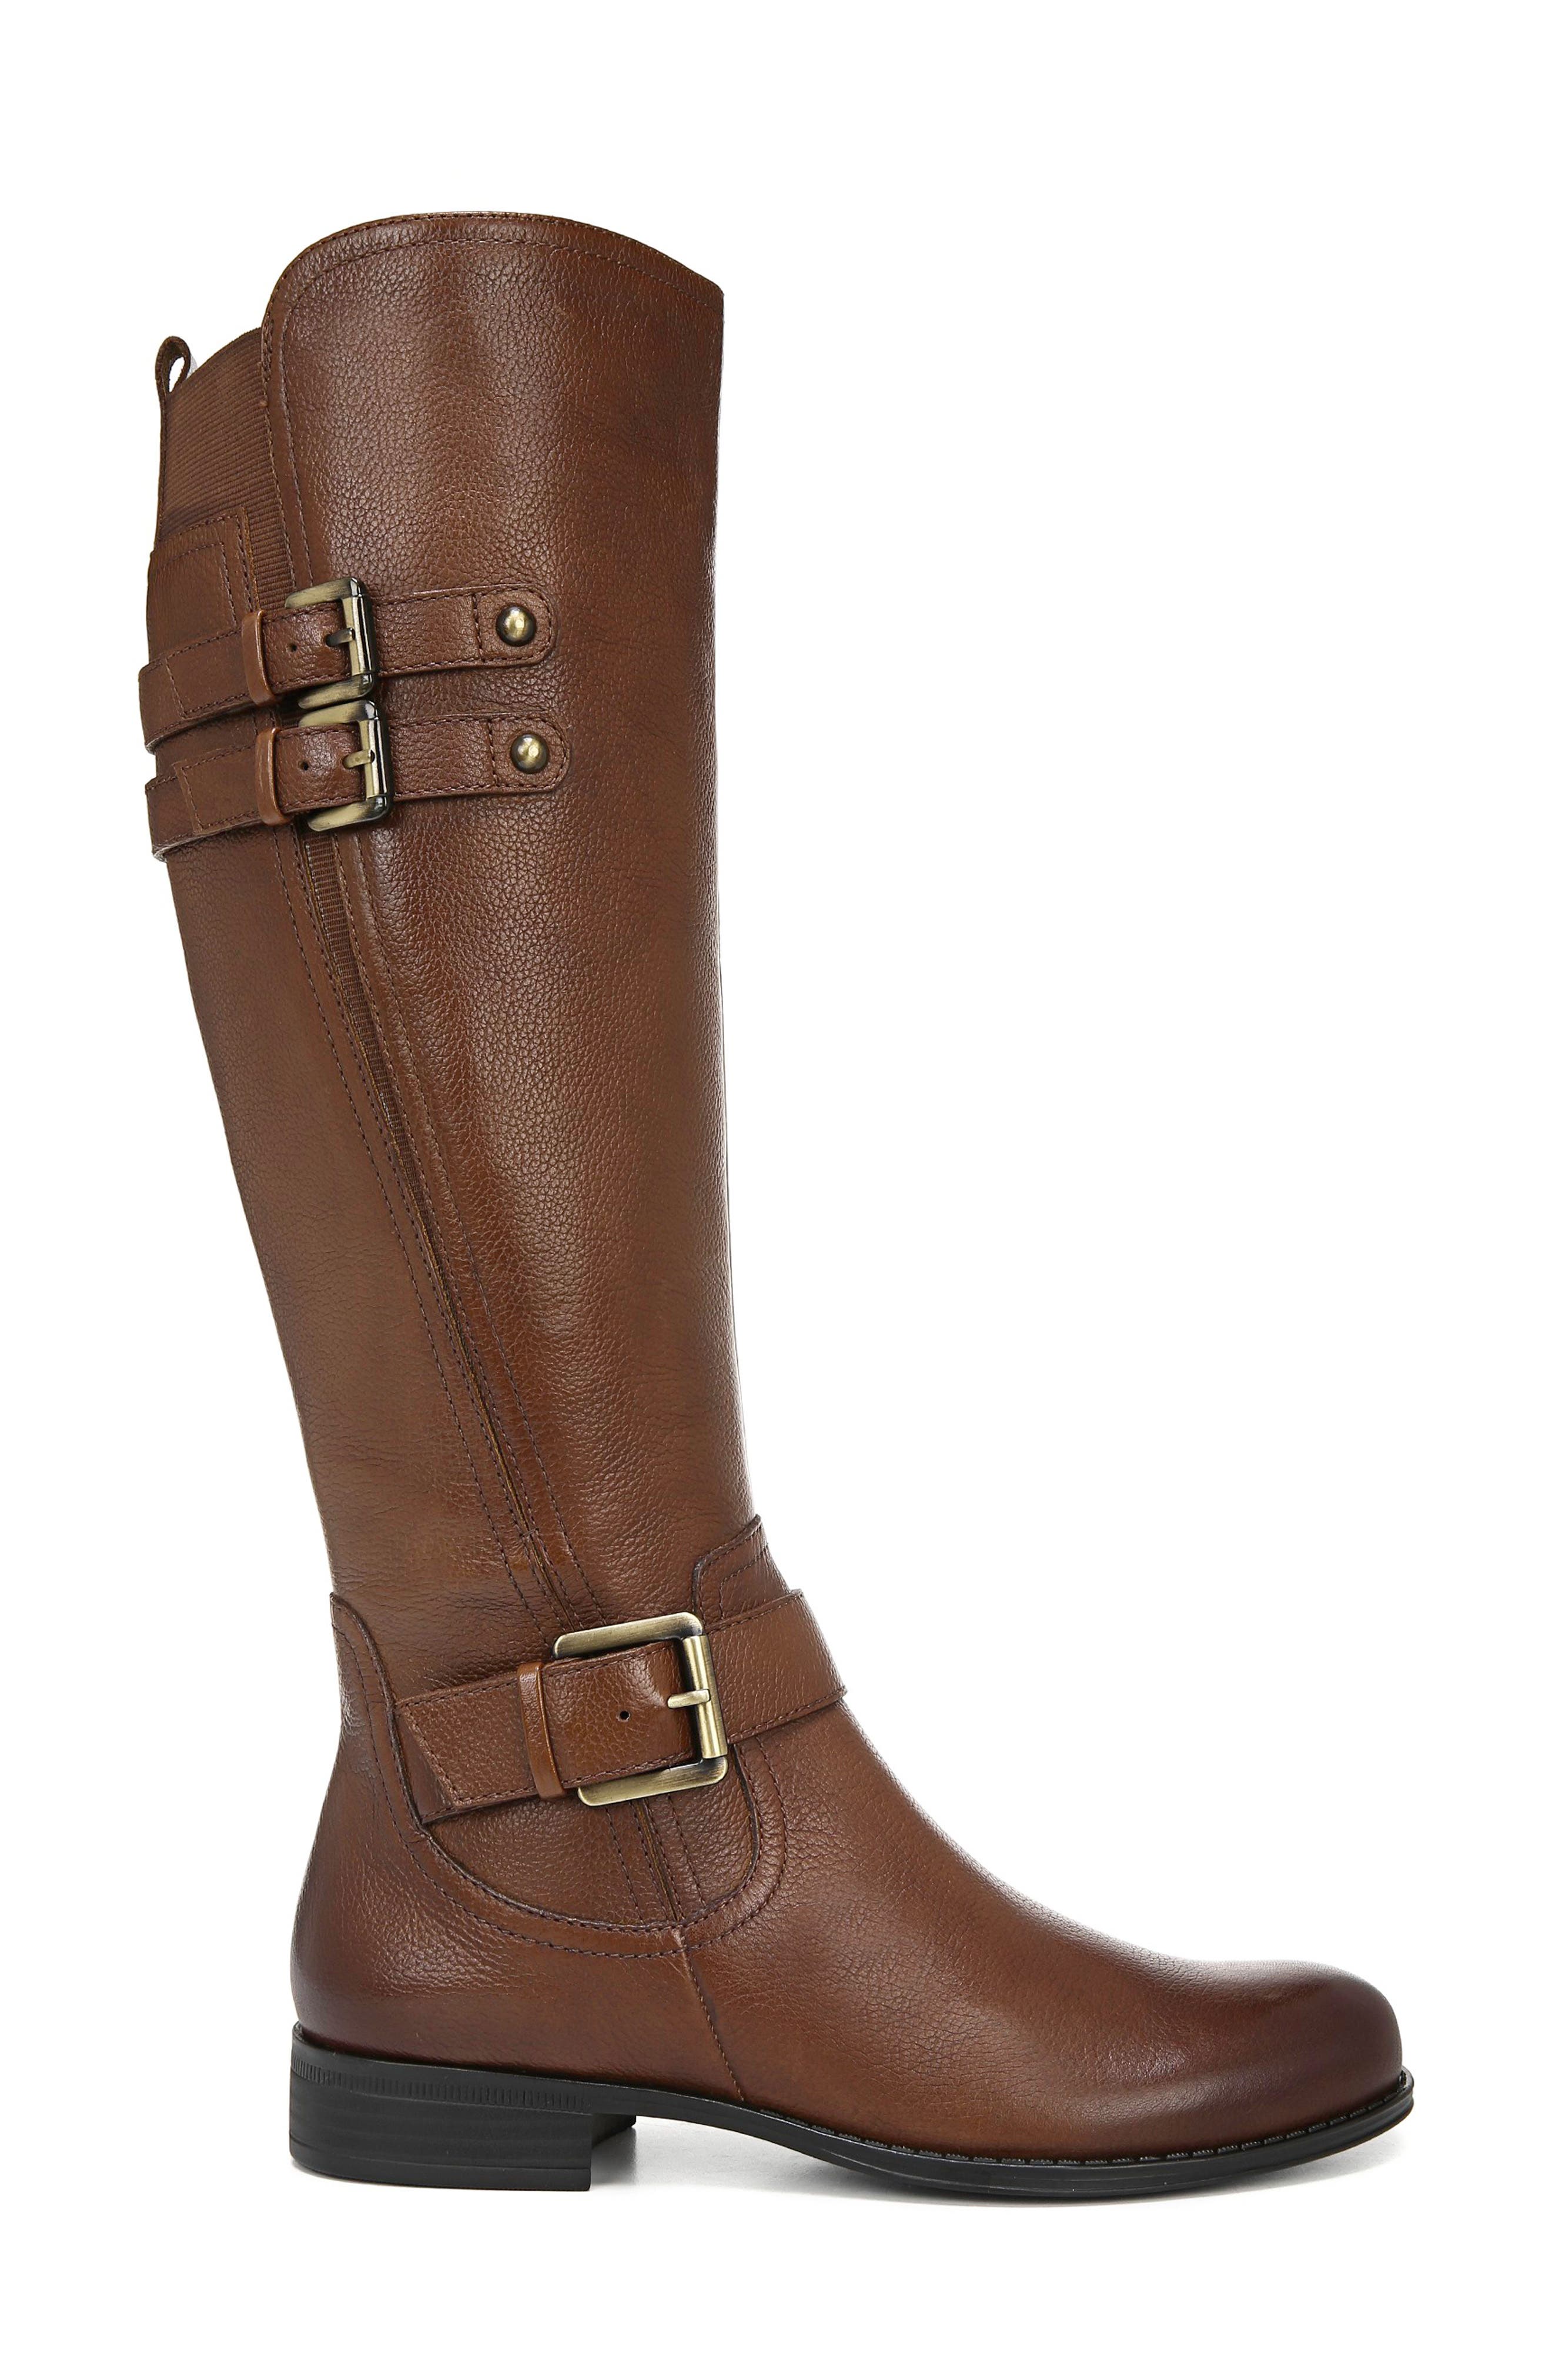 athletic calf boots